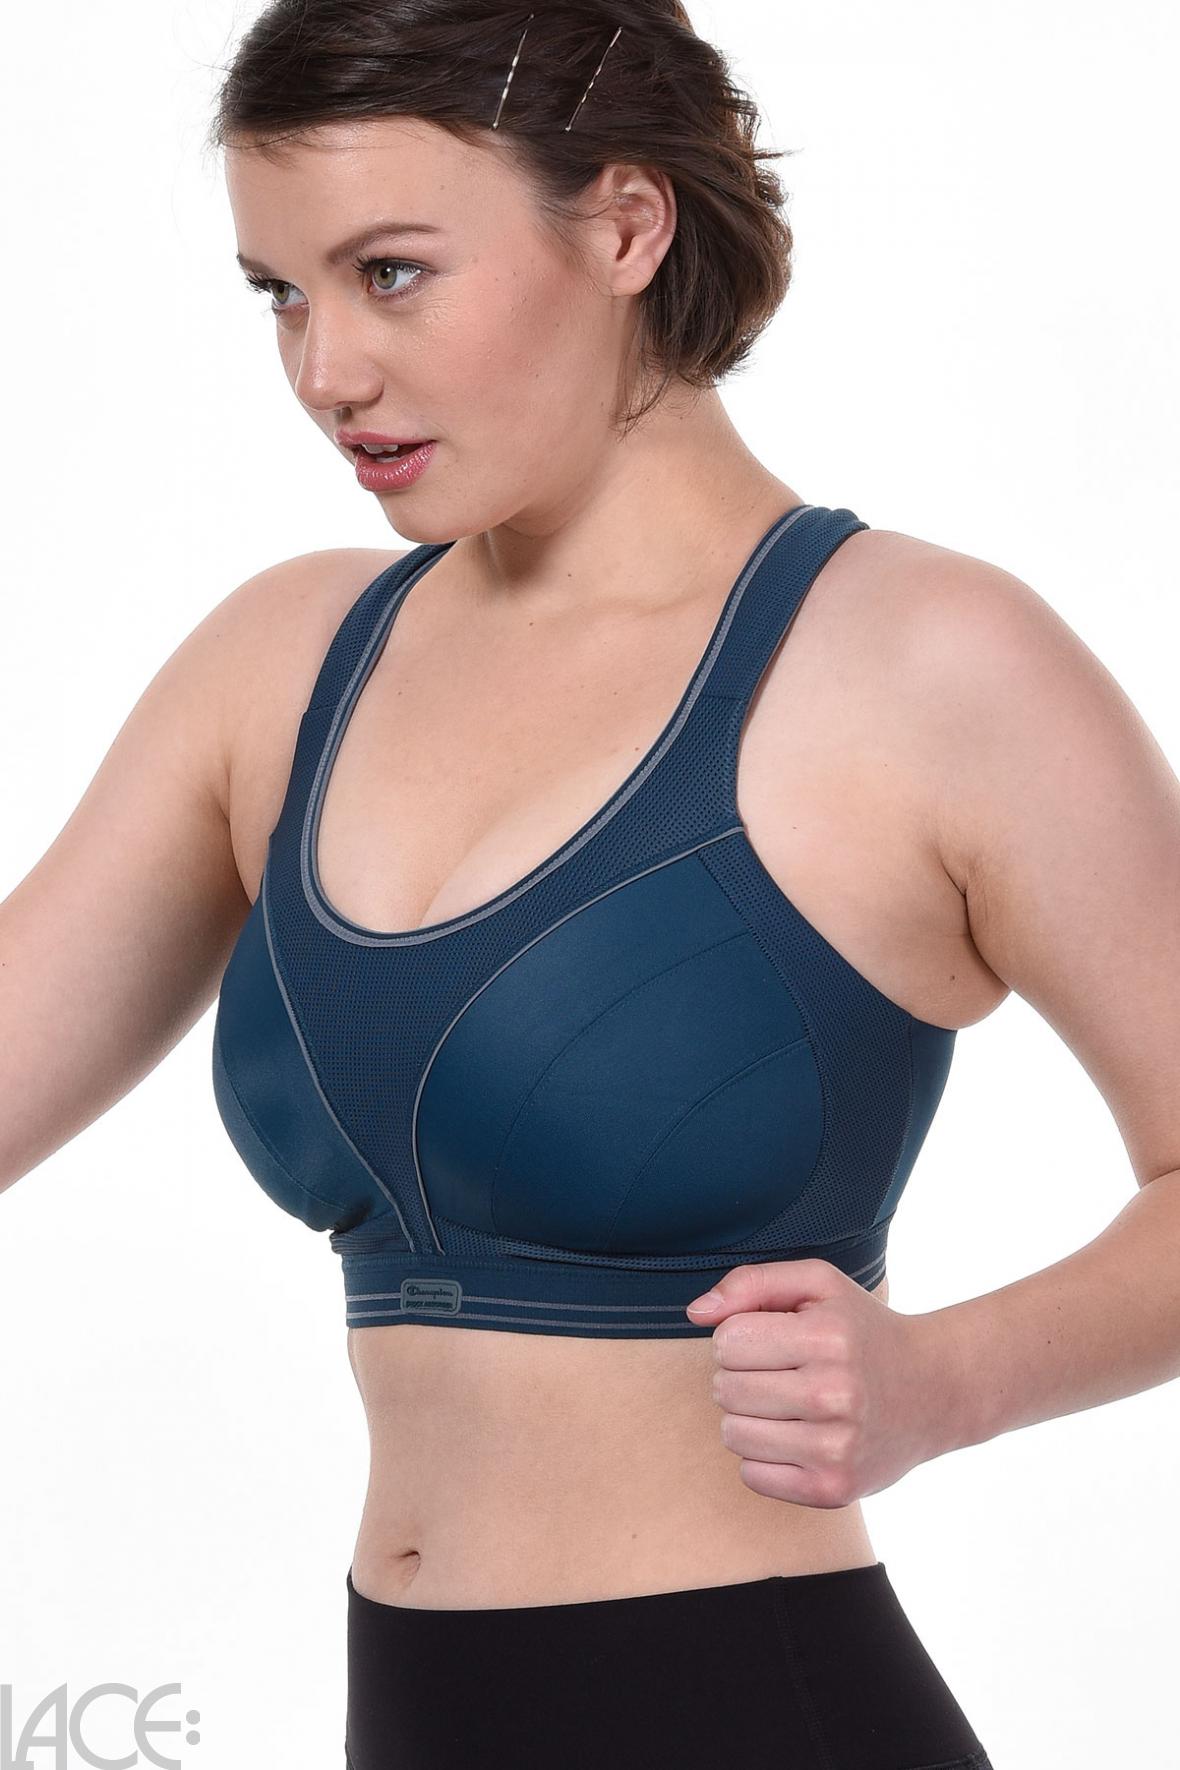 A Quick Up Close View of the Shock Absorber Ultimate Run Bra Padded Sports  Bra 